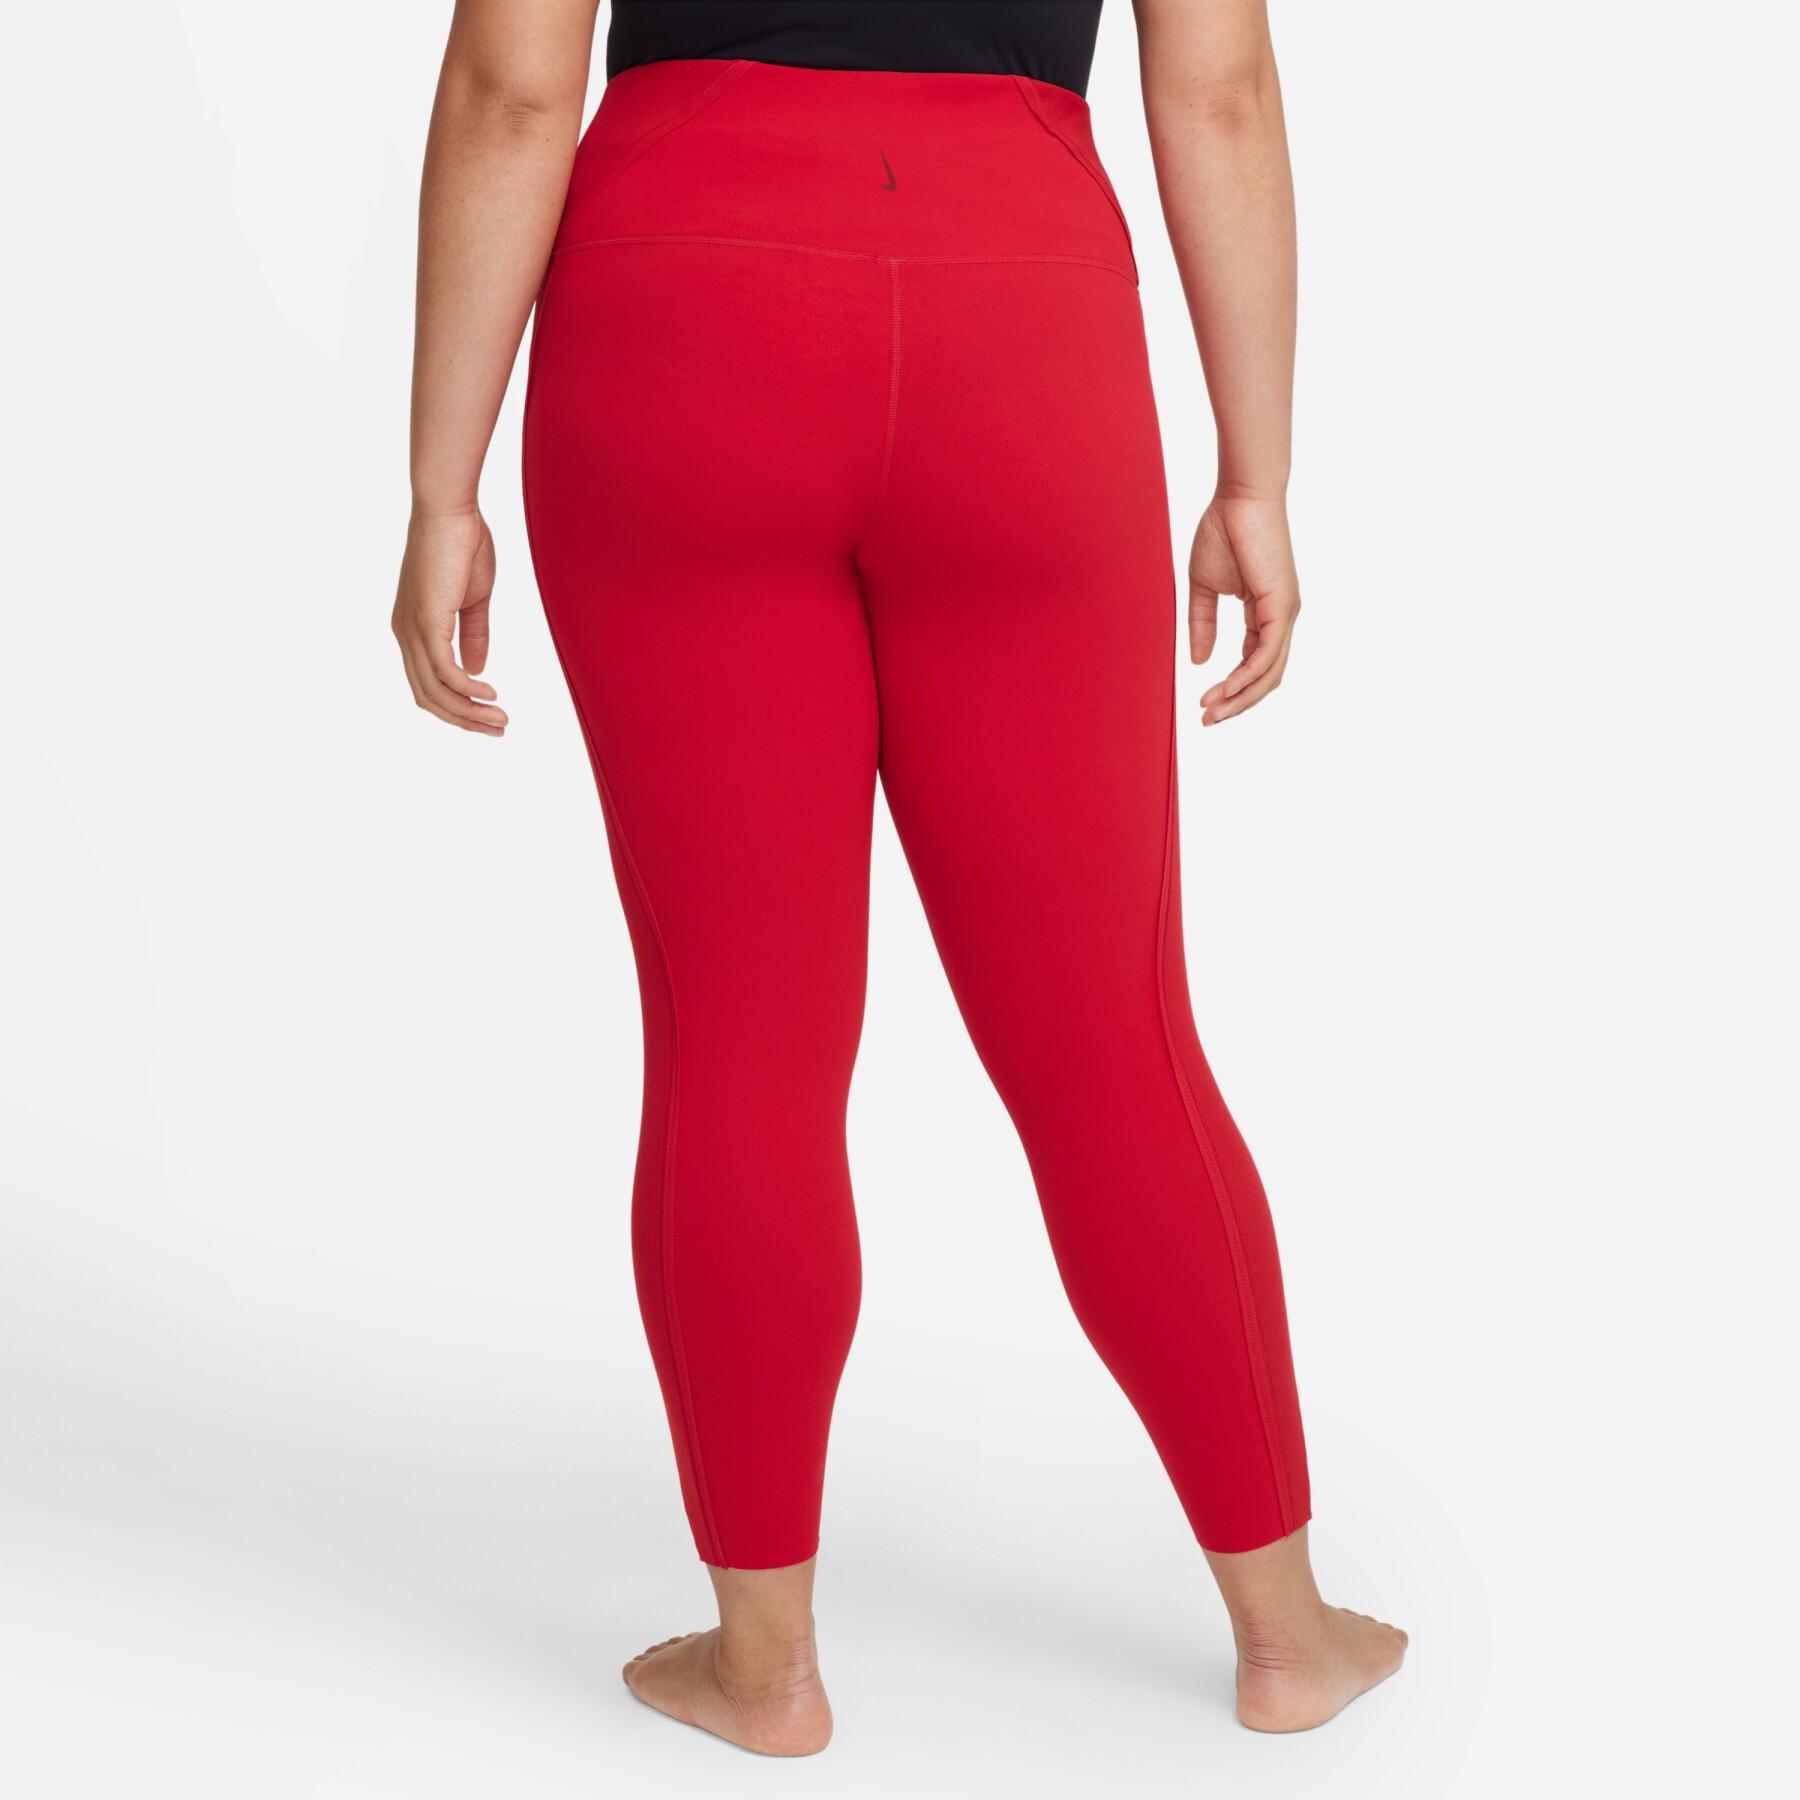 Legginsy damskie Nike dynamic fit luxe 7/8 tgt tailoring